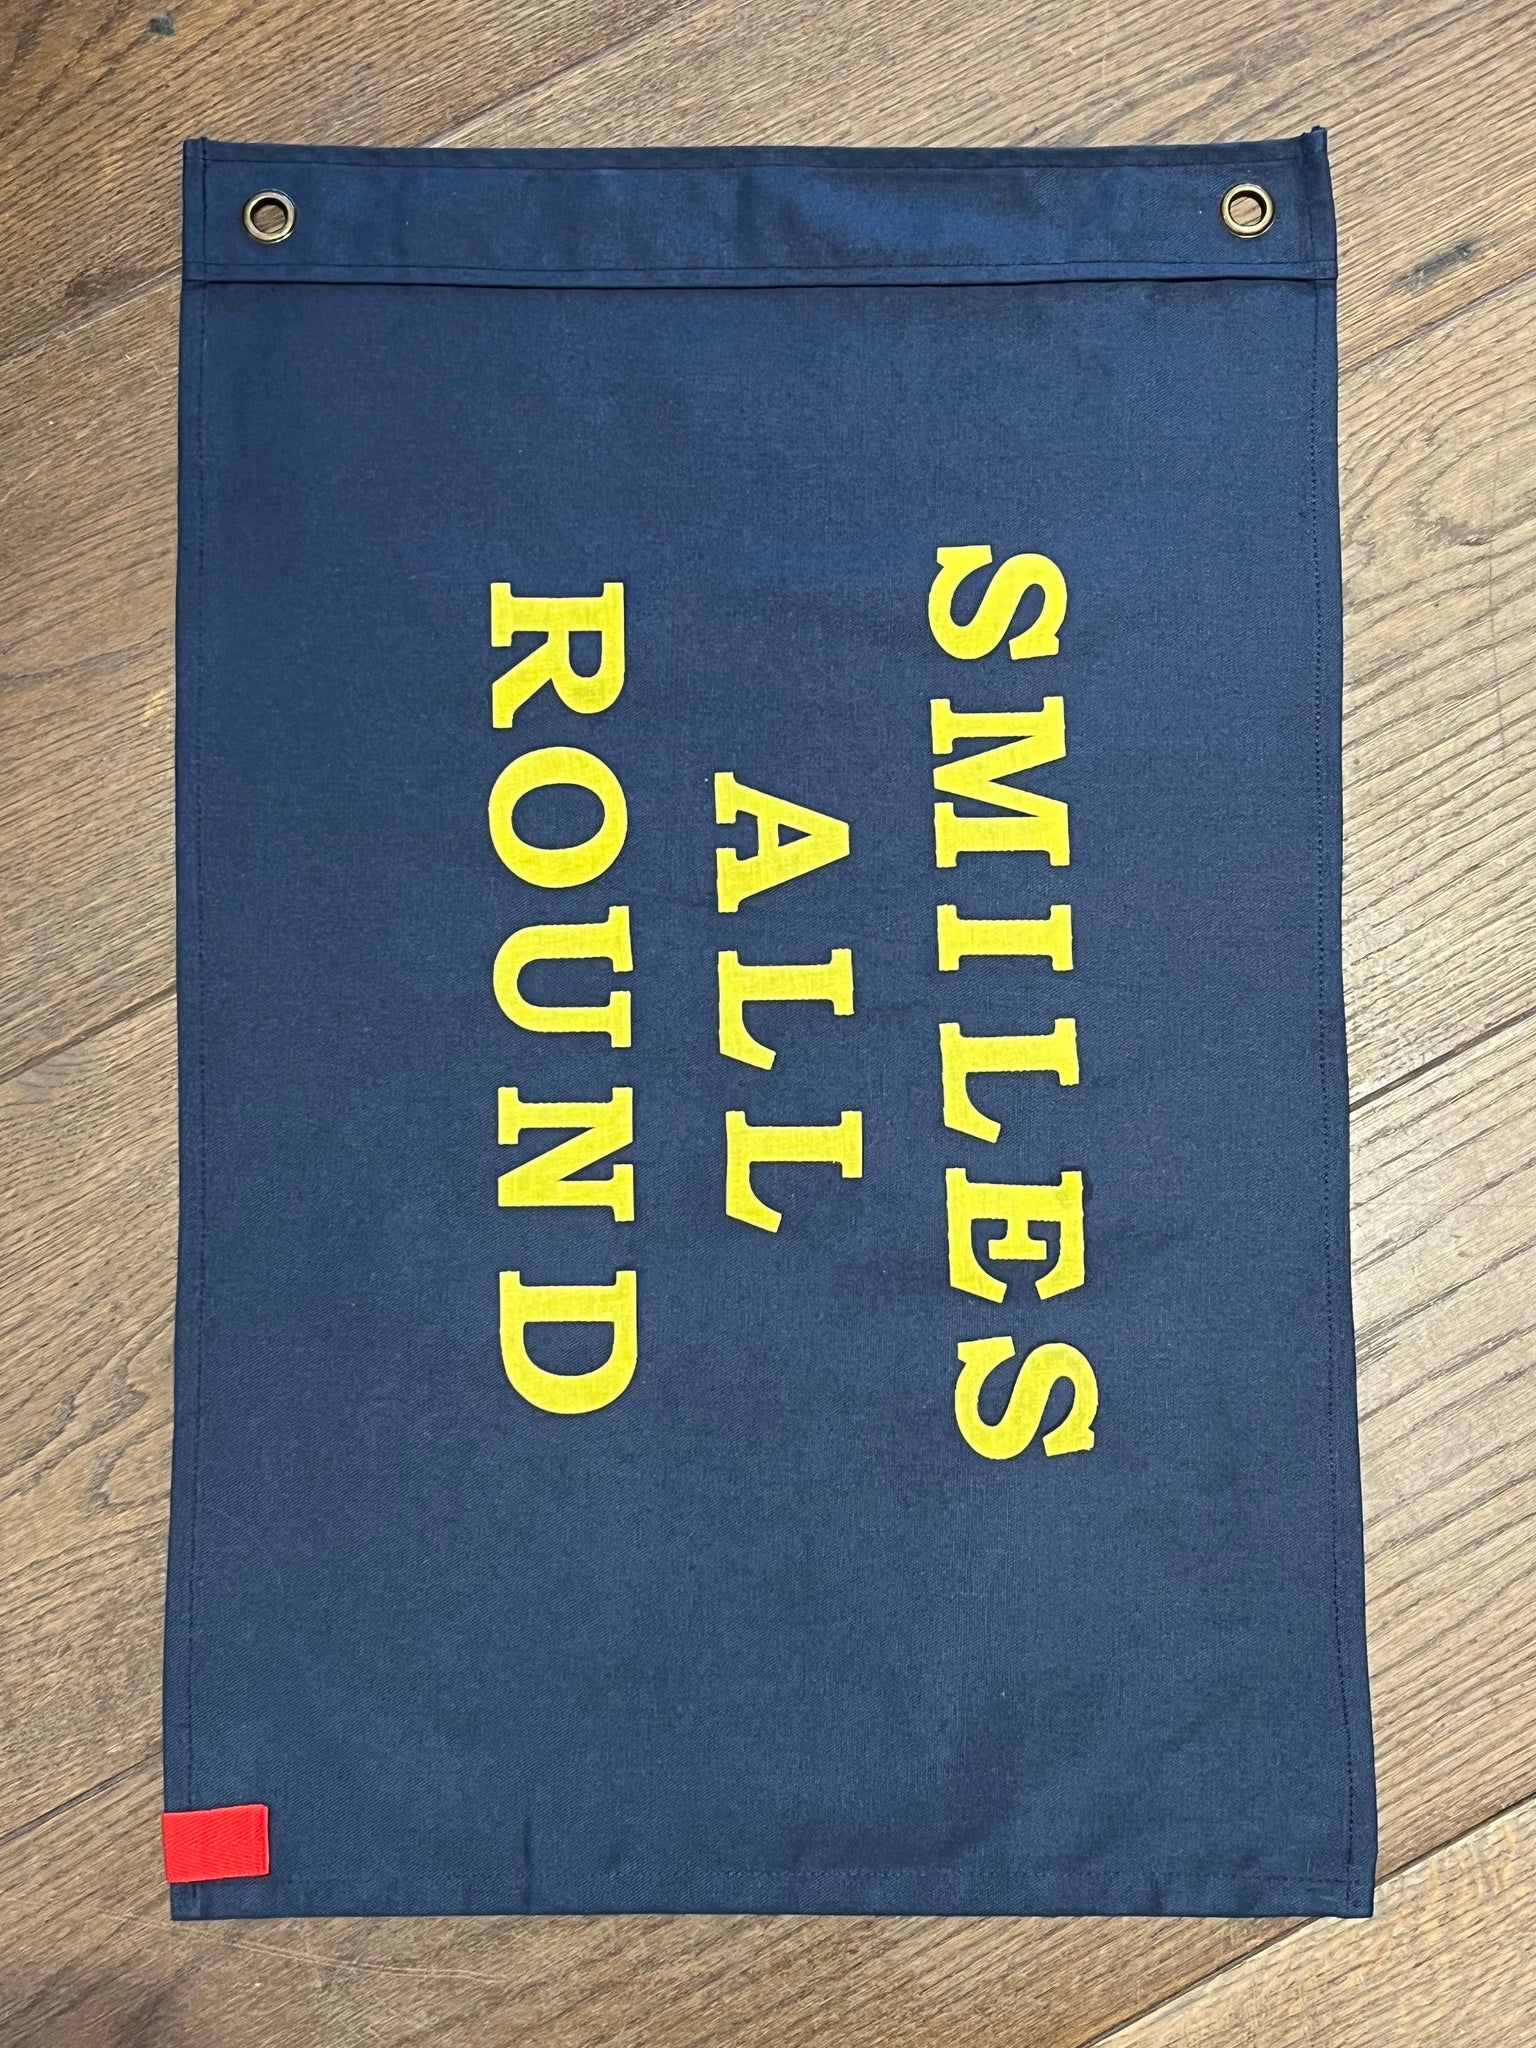 SMILES ALL ROUND - HAND MADE FLAG